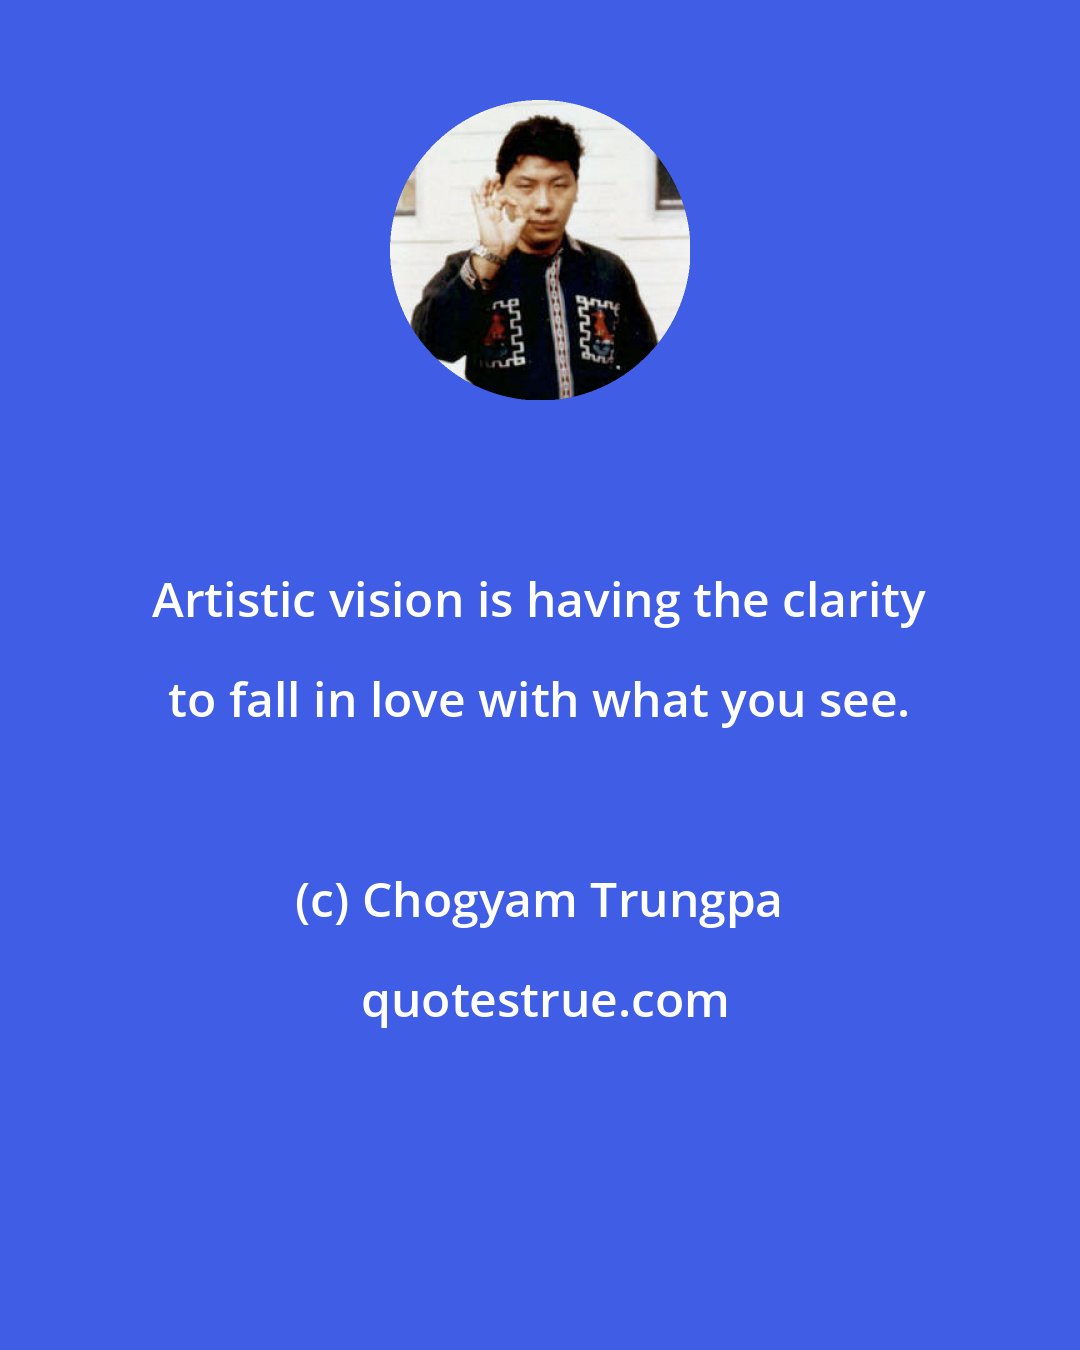 Chogyam Trungpa: Artistic vision is having the clarity to fall in love with what you see.